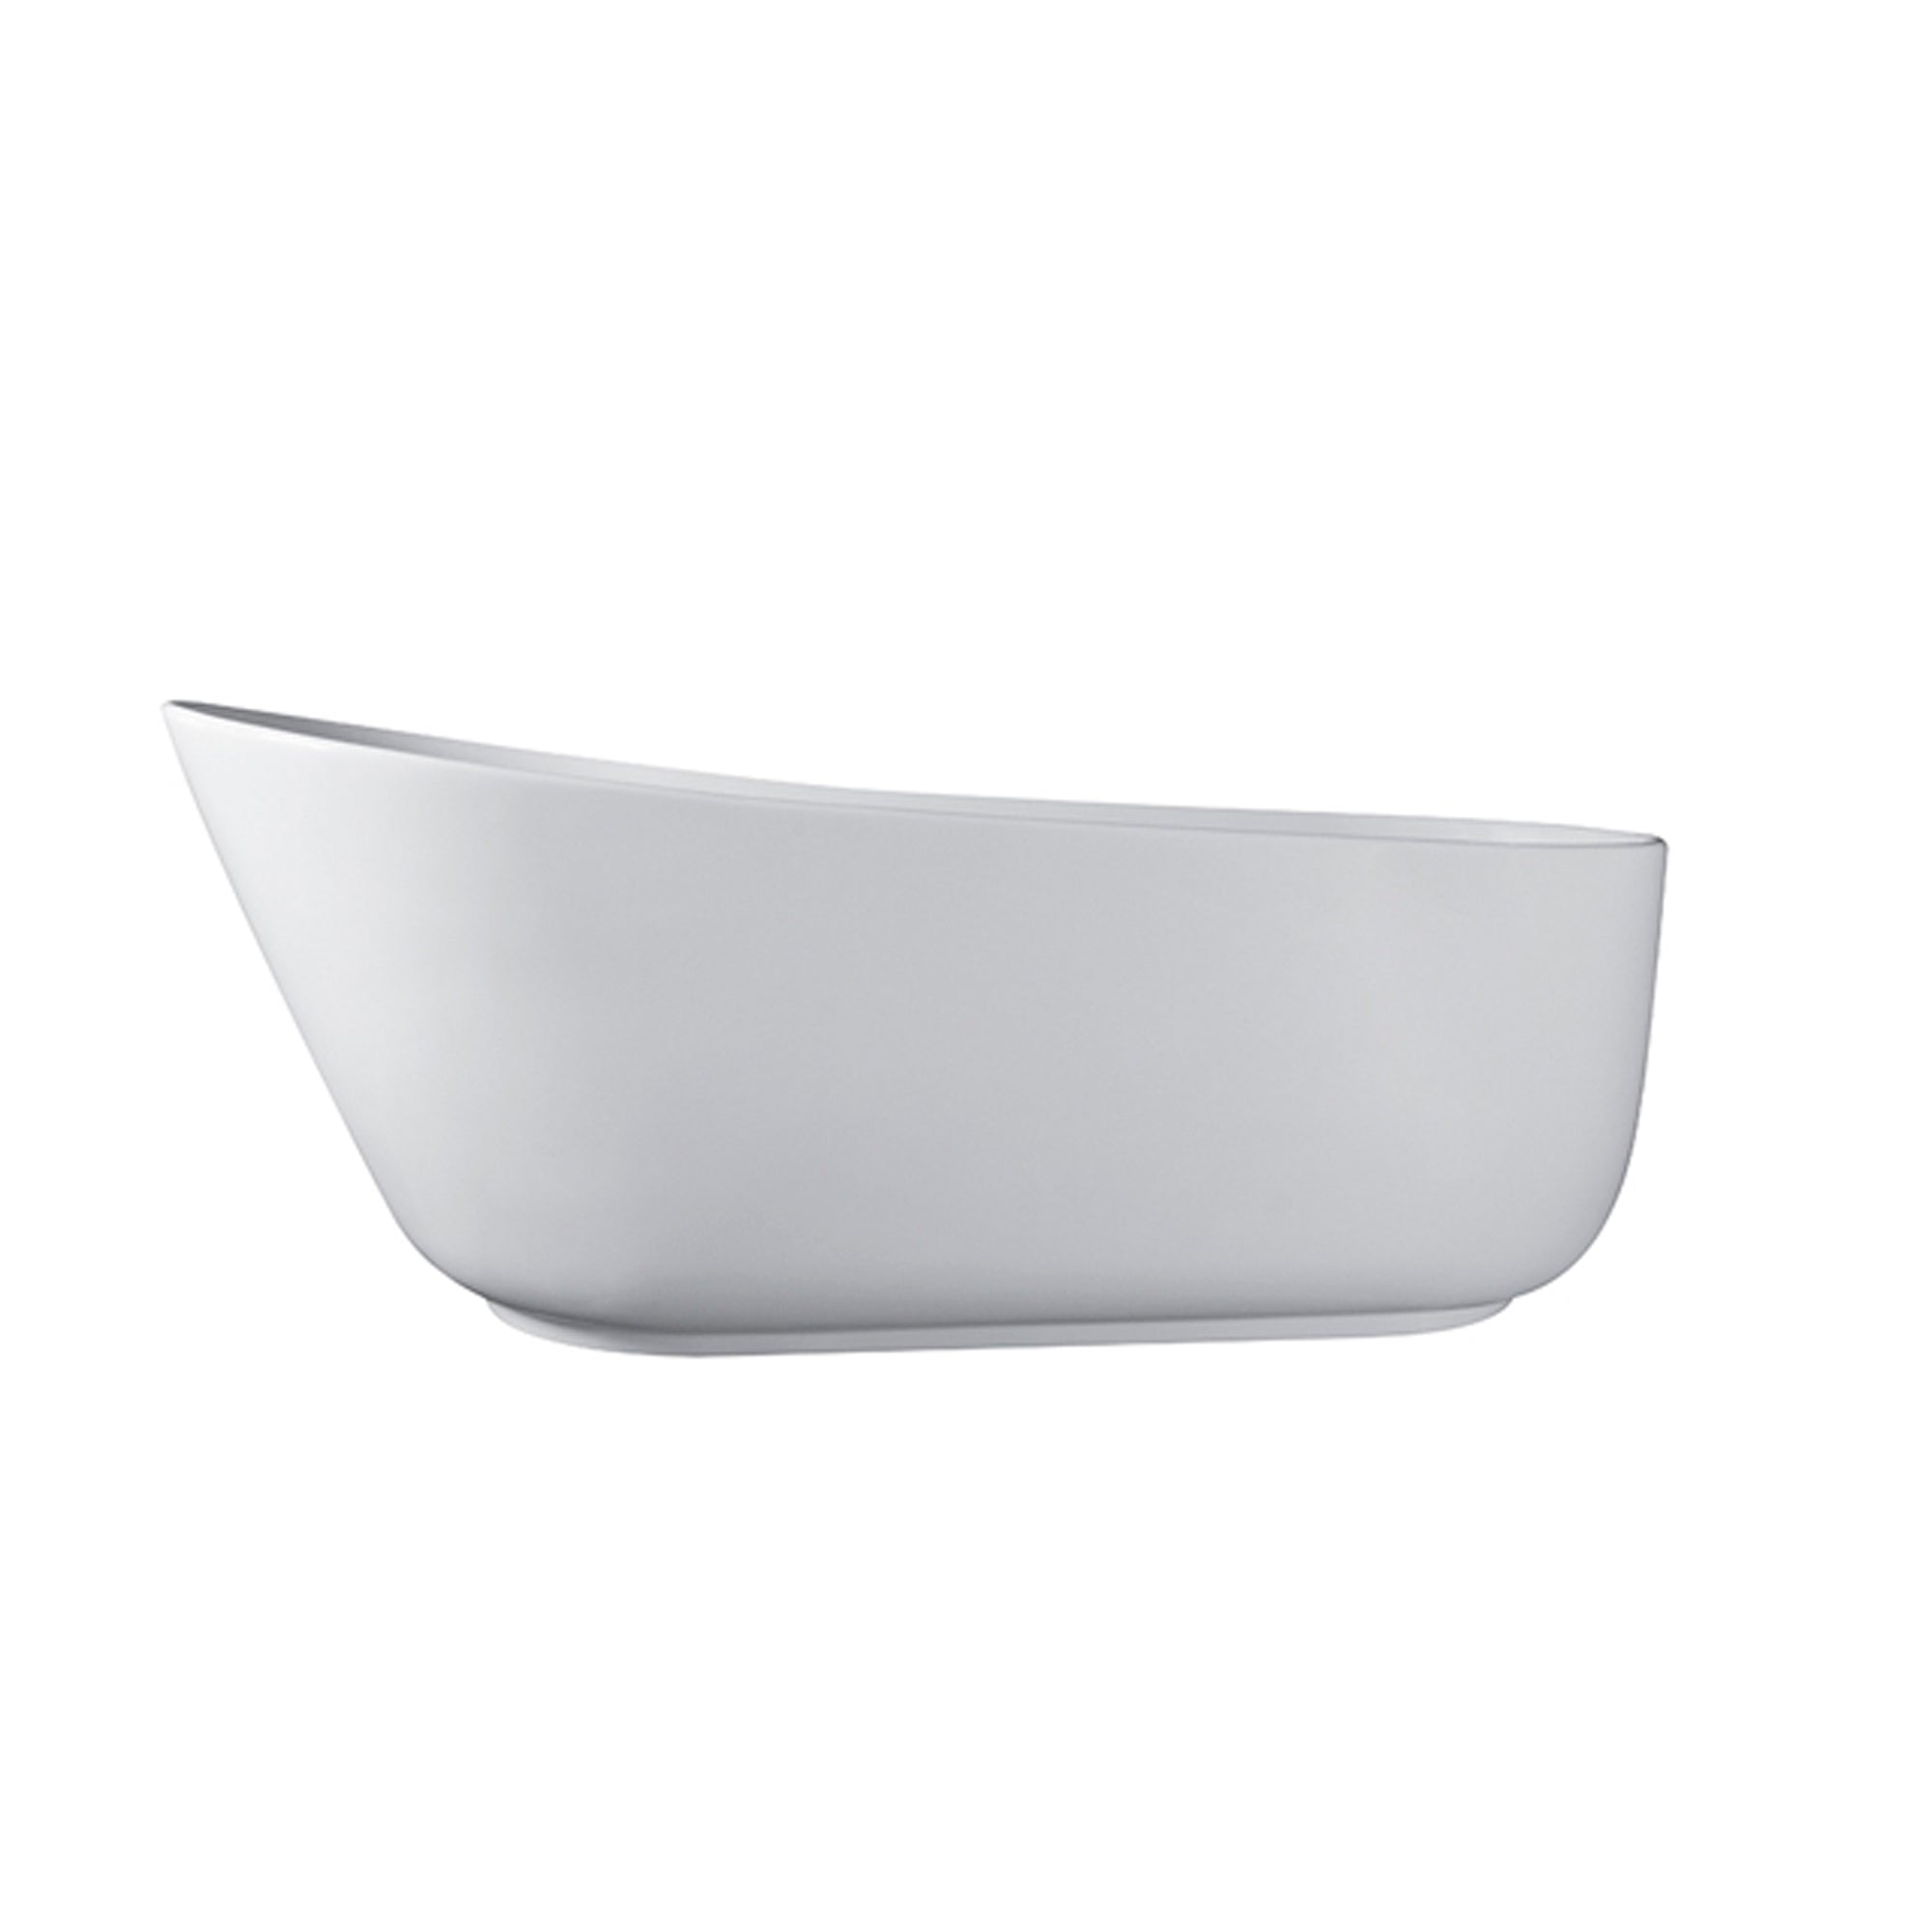 67-inch Solid Surface Stone Resin Oval Shape Soaking Bathtub with Overflow in Matte White-Arrisea